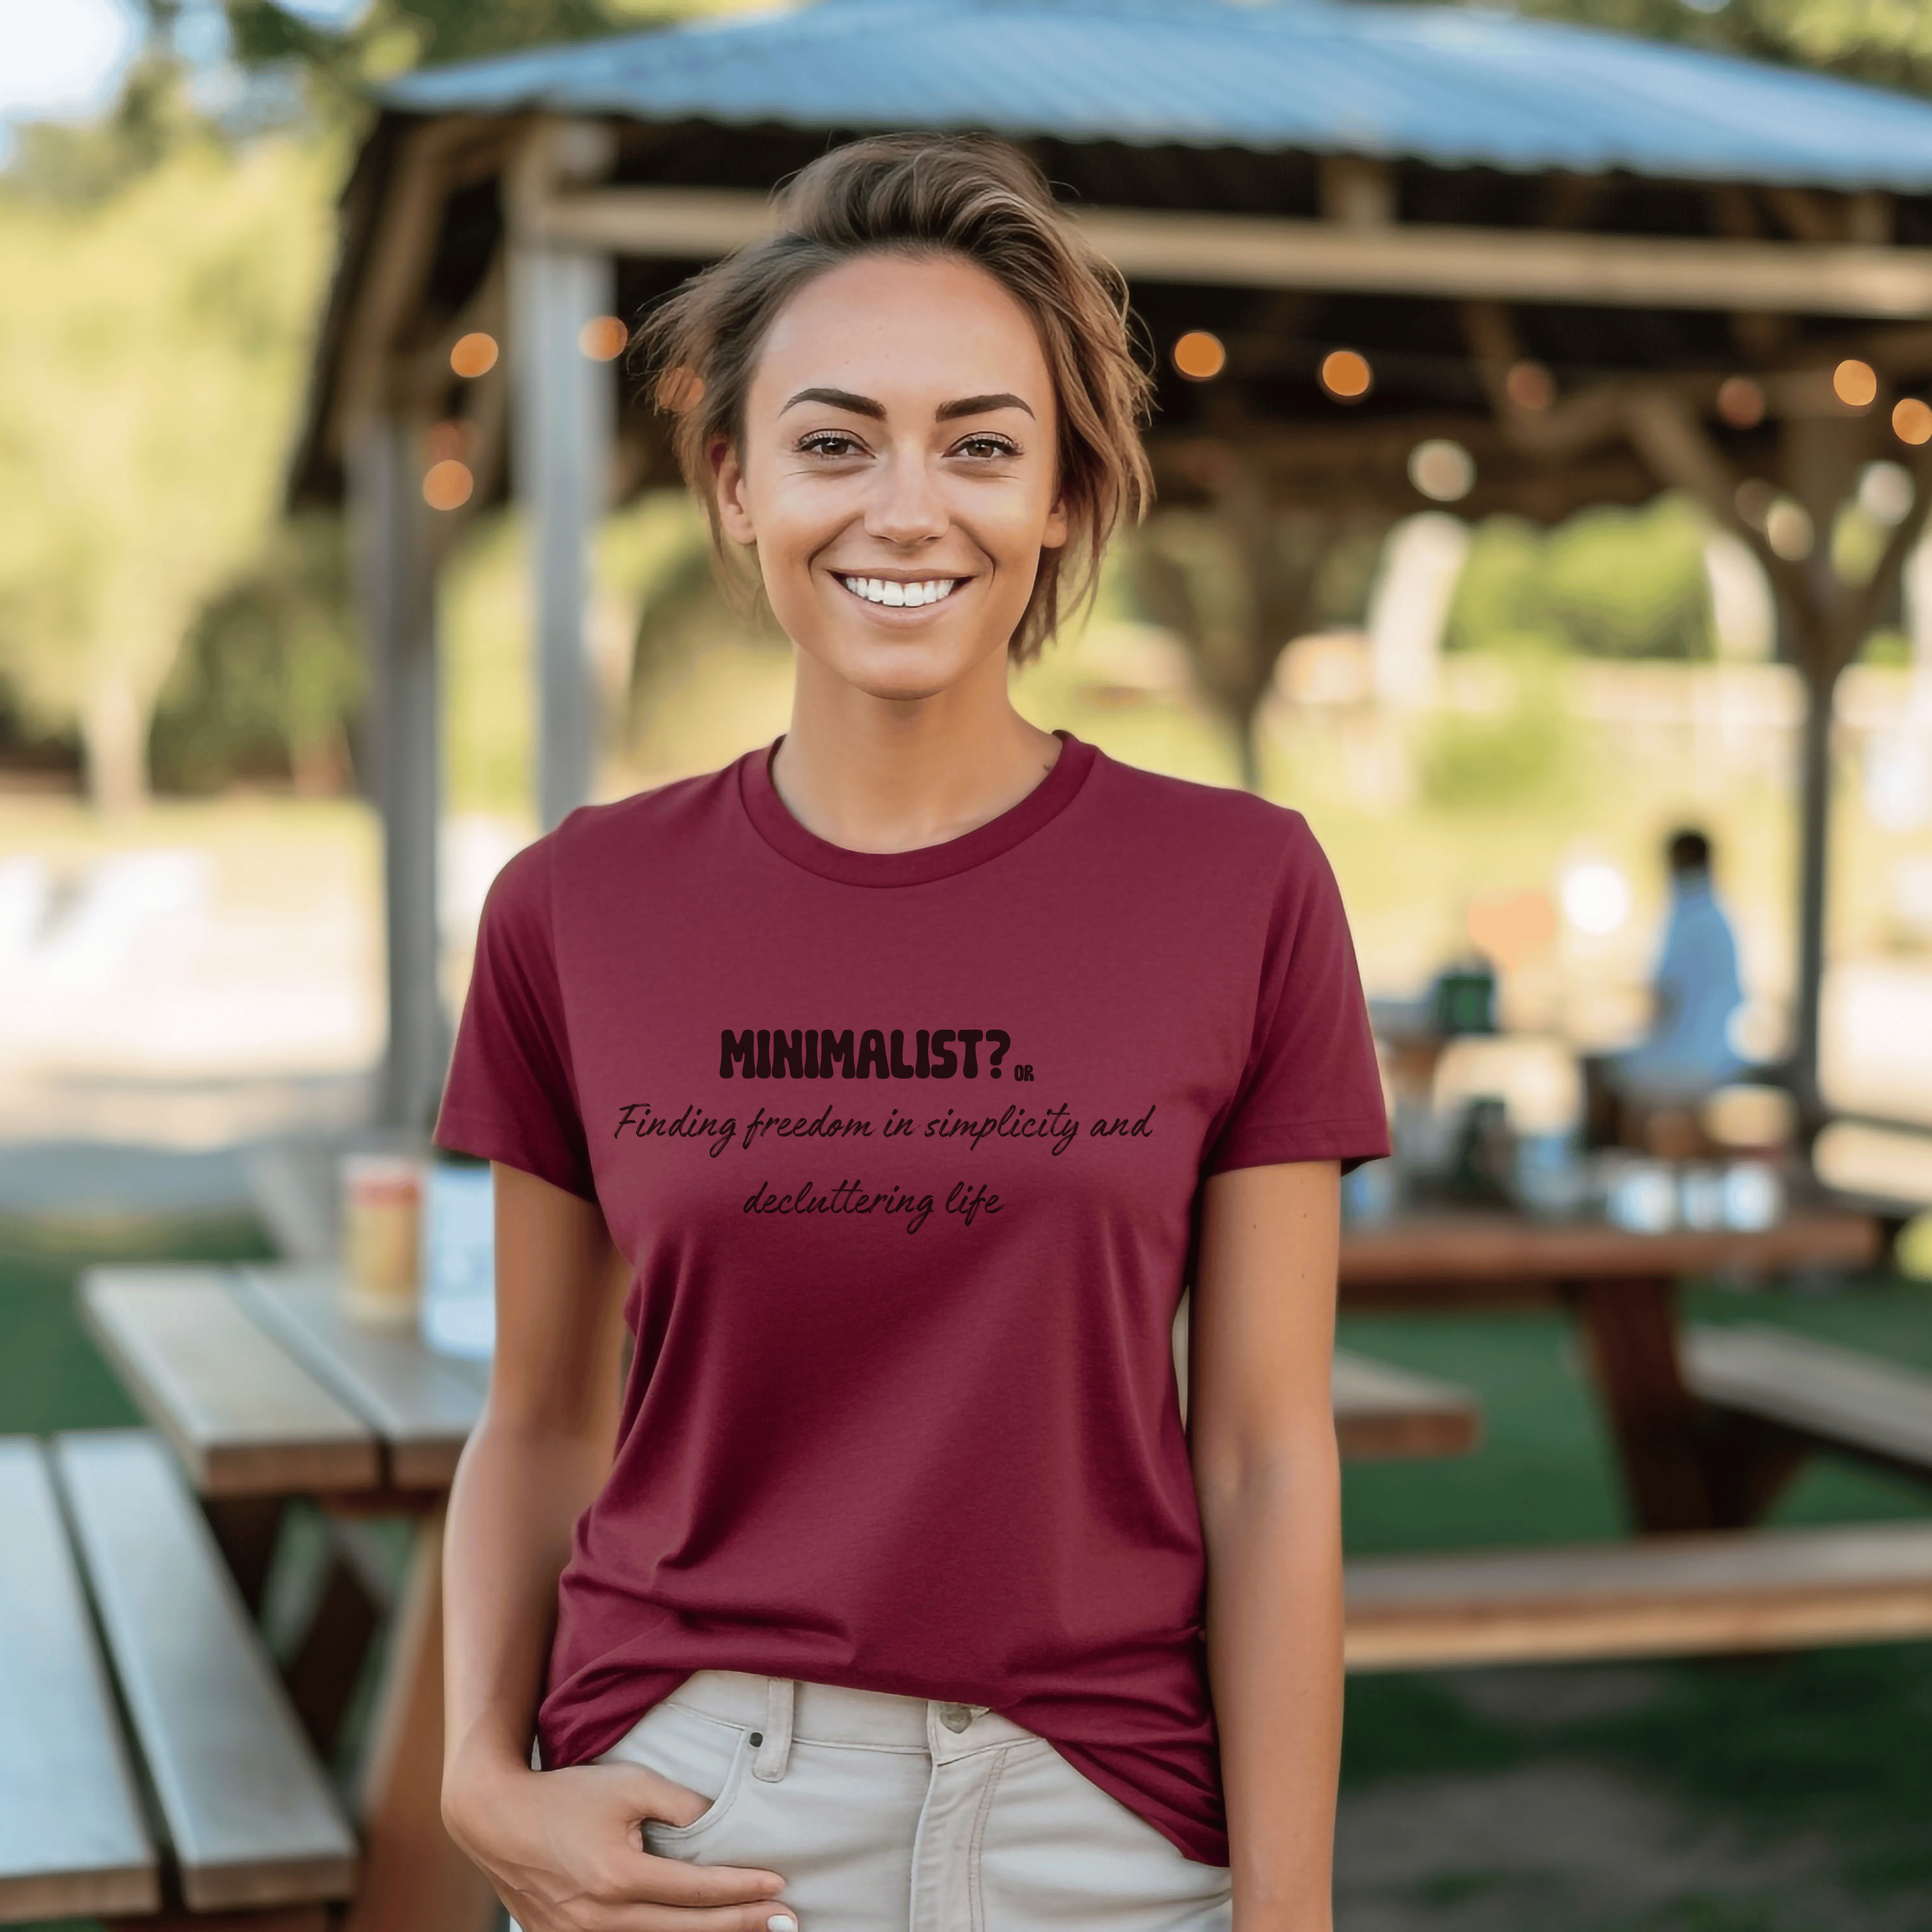 Minimalist? or Finding freedom in simplicity and decluttering life T-shirt